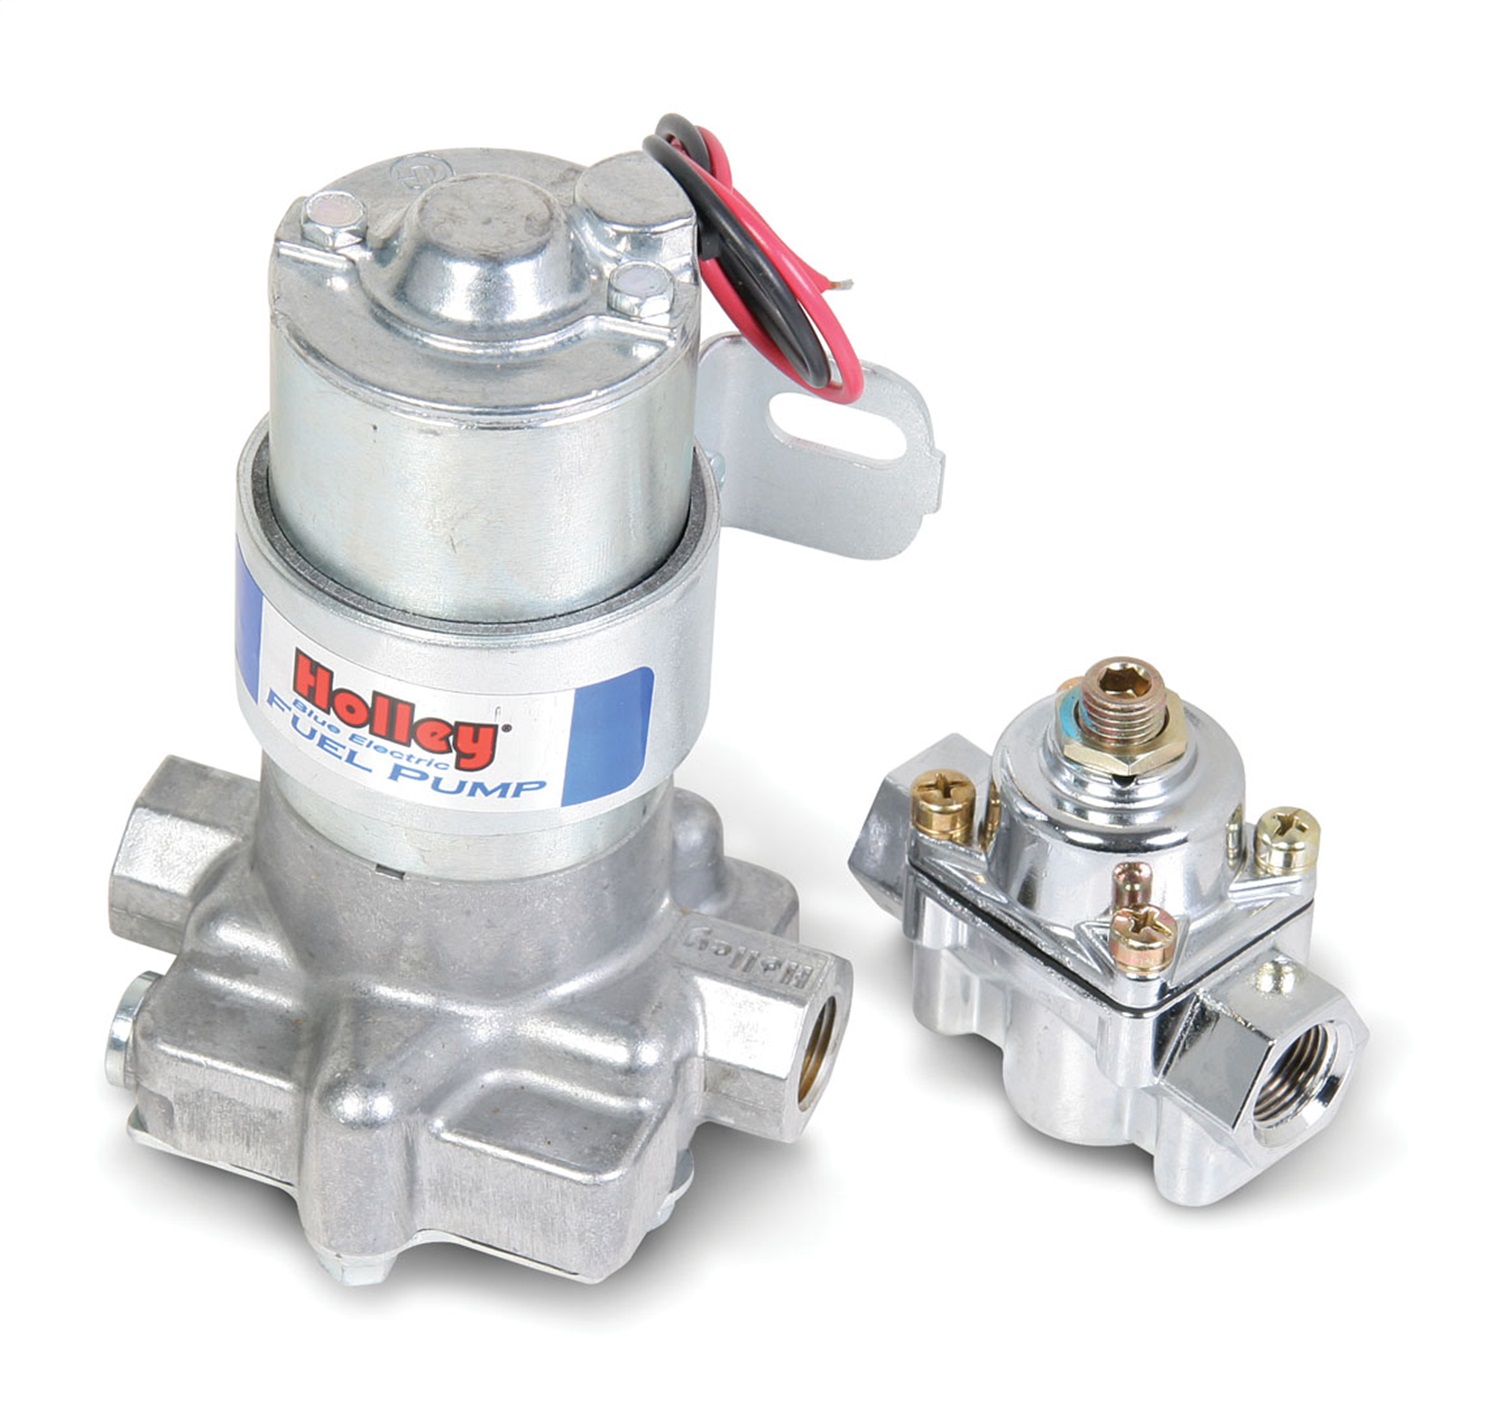 Holley Performance Holley Performance 12-802-1 Electric Fuel Pump